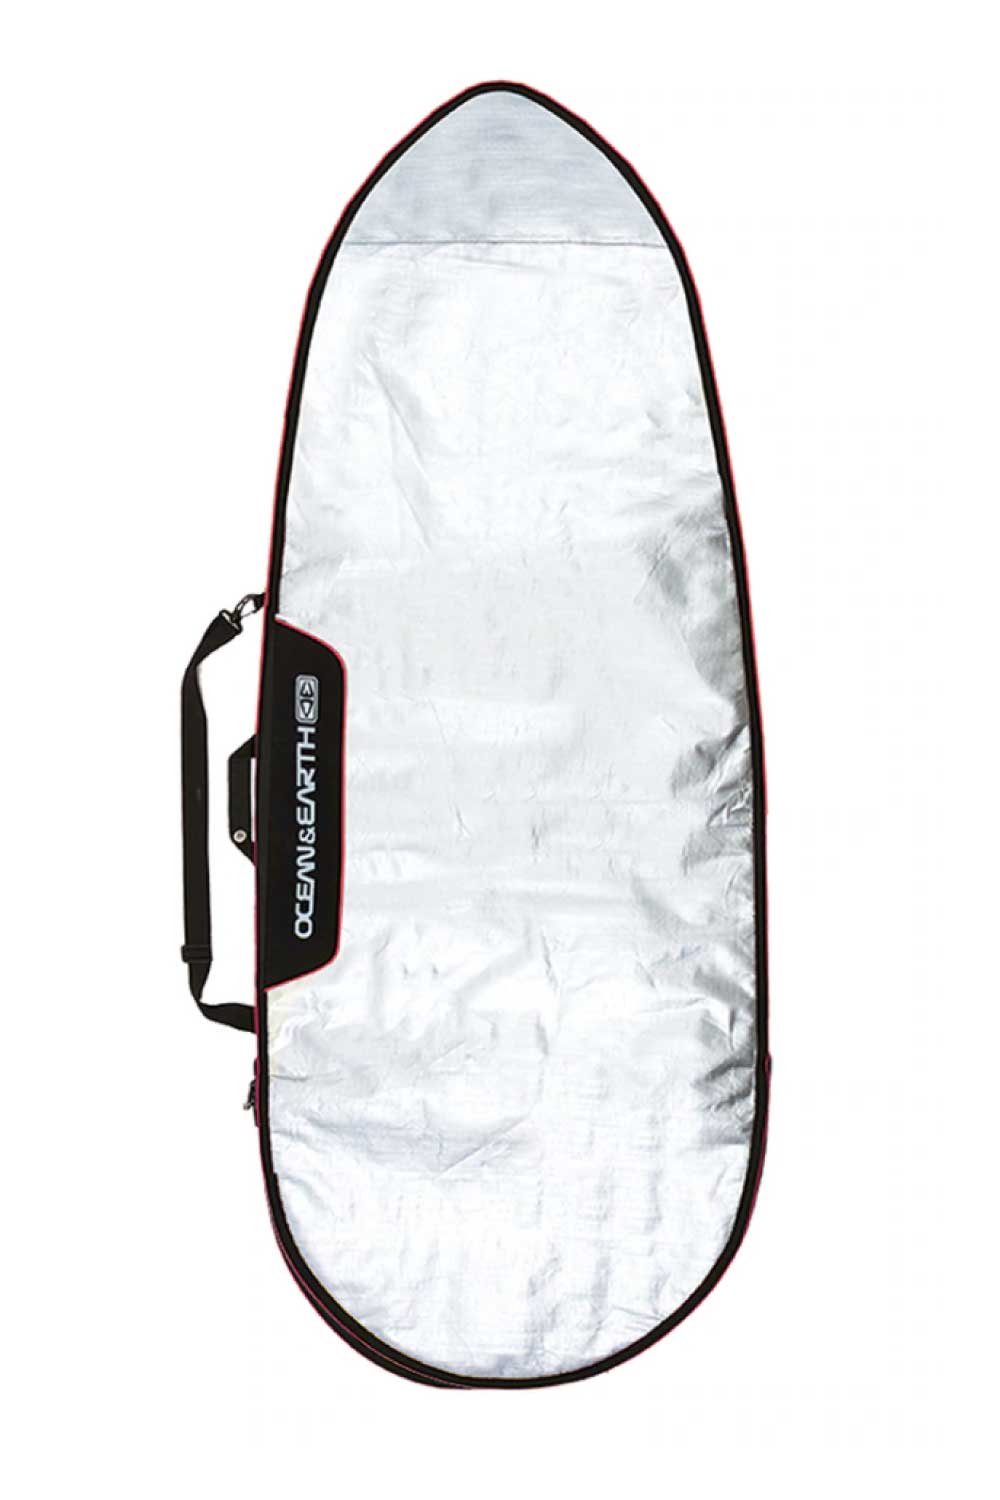 Ocean & Earth Super Wide Fish Surfboard Cover